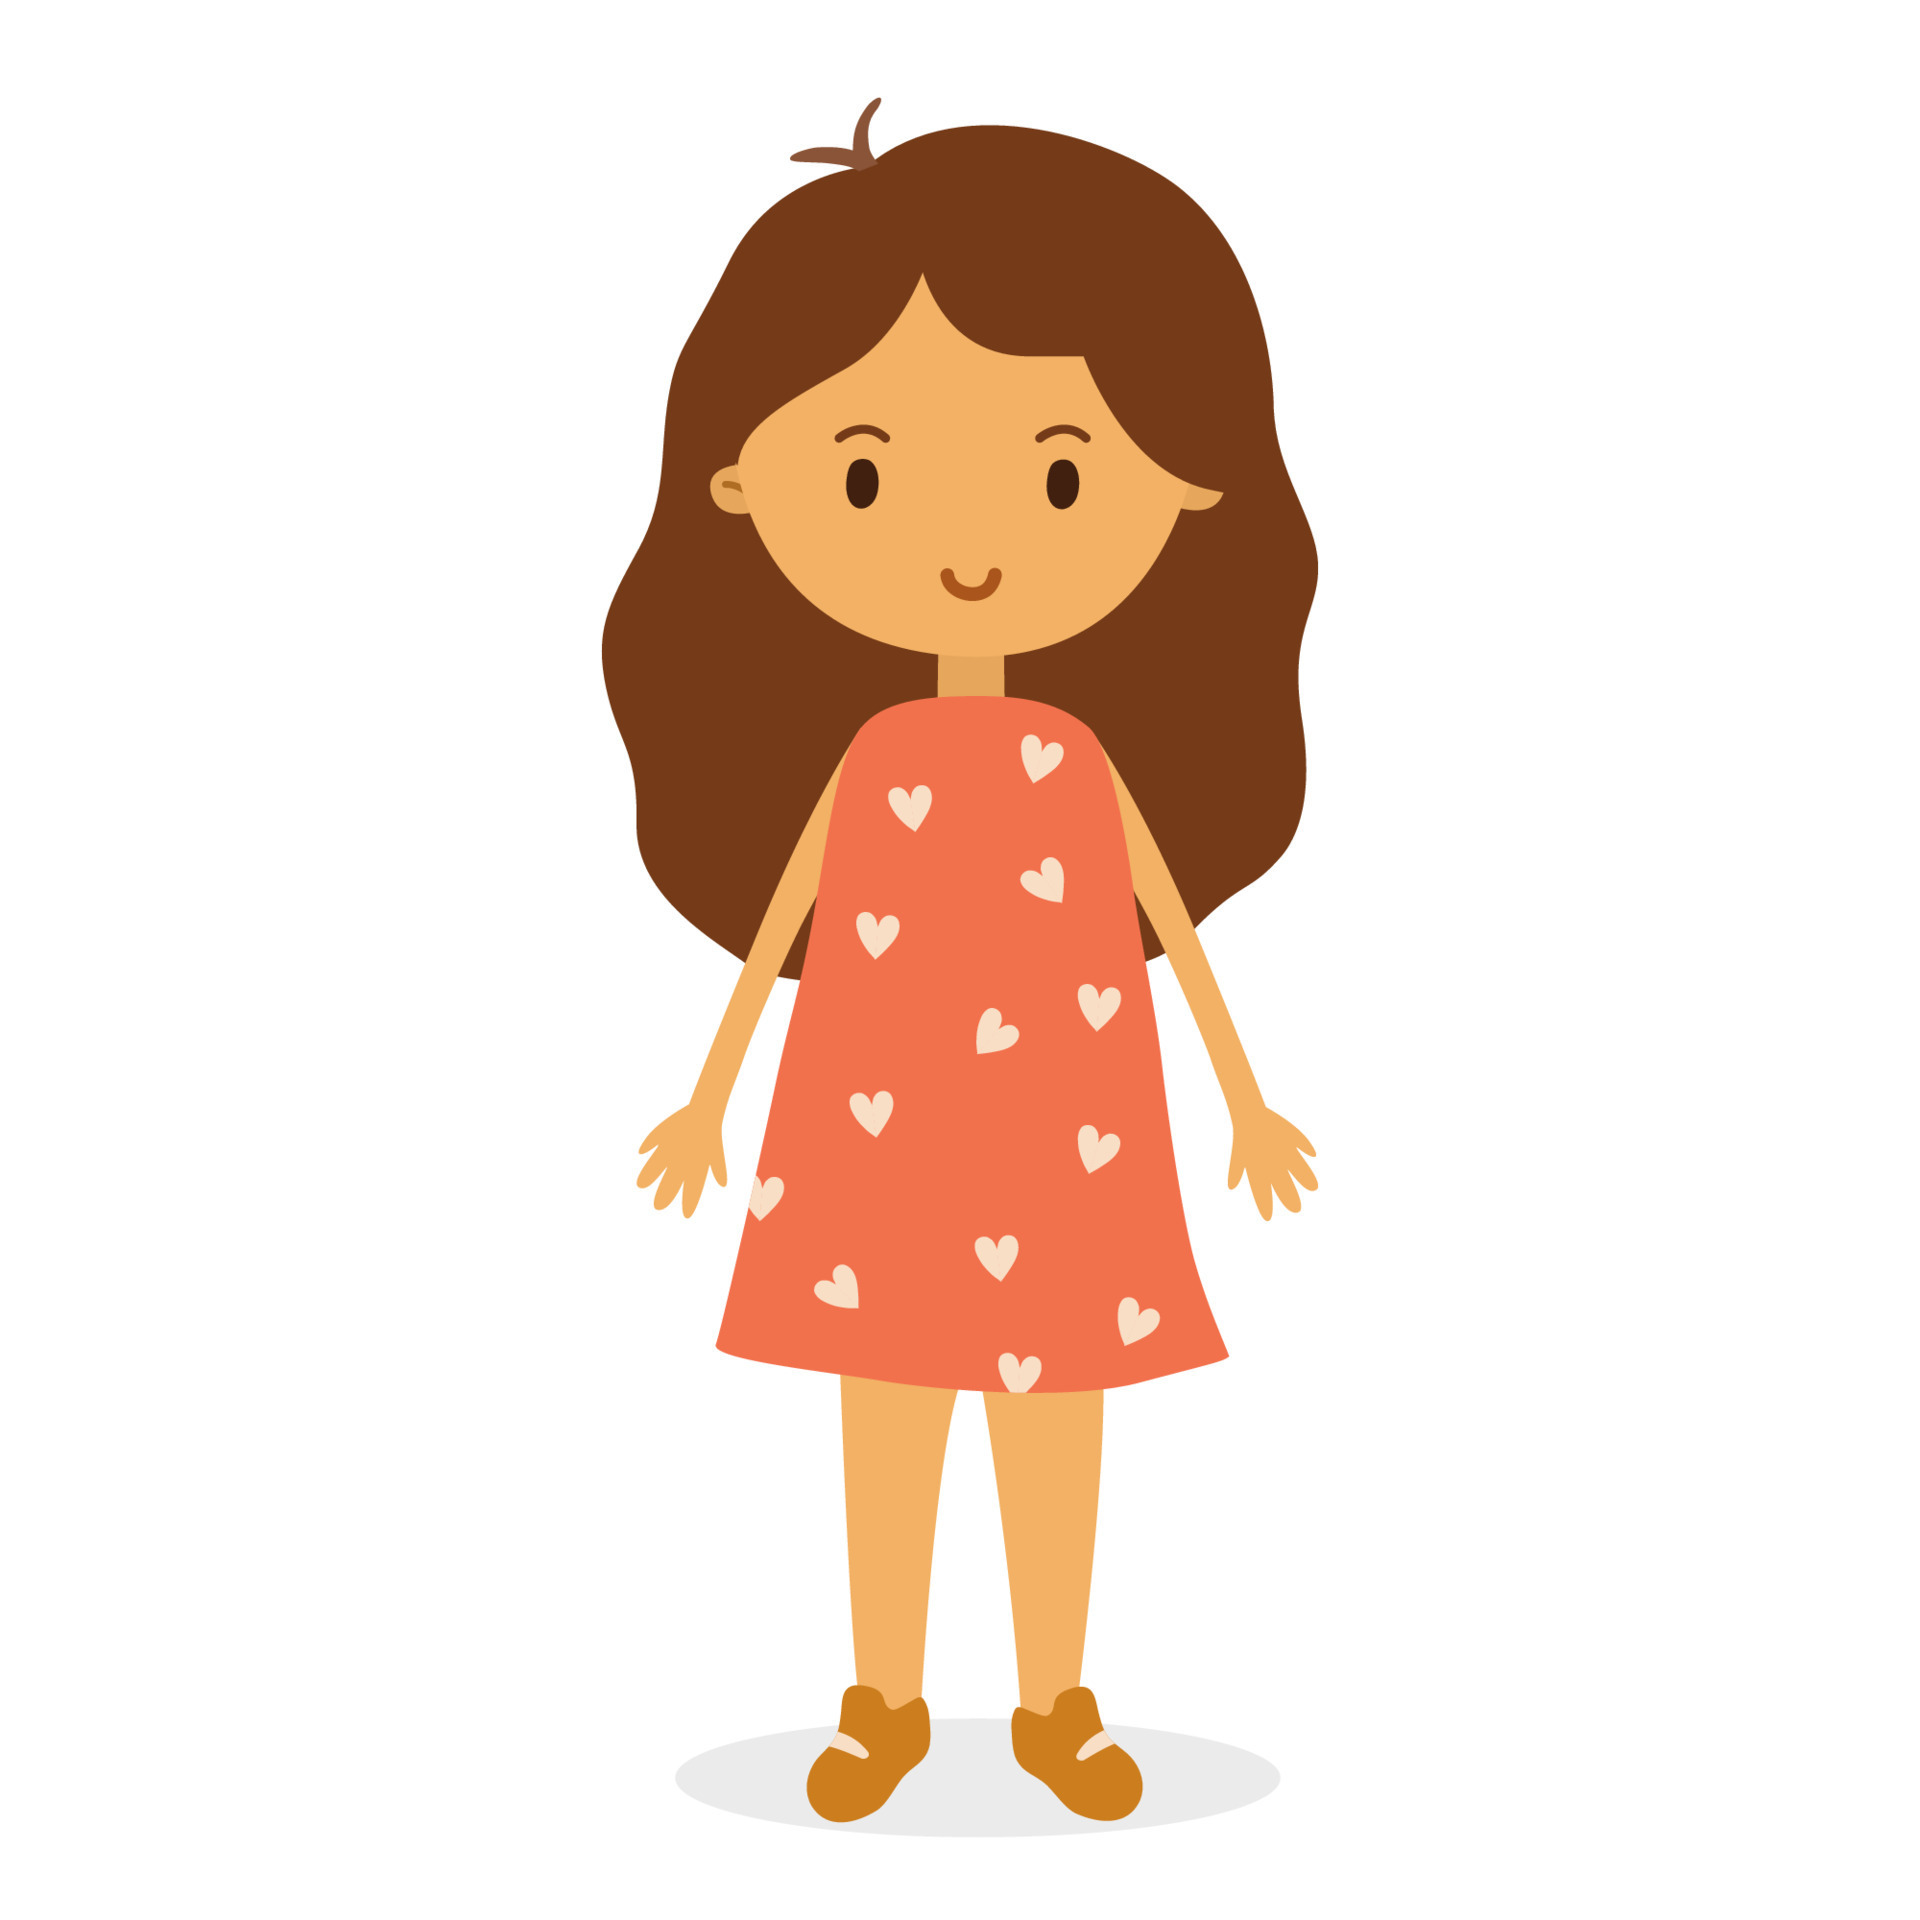 https://static.vecteezy.com/system/resources/previews/016/023/289/original/cute-girl-in-red-dress-simple-character-in-flat-style-isolated-on-white-vector.jpg